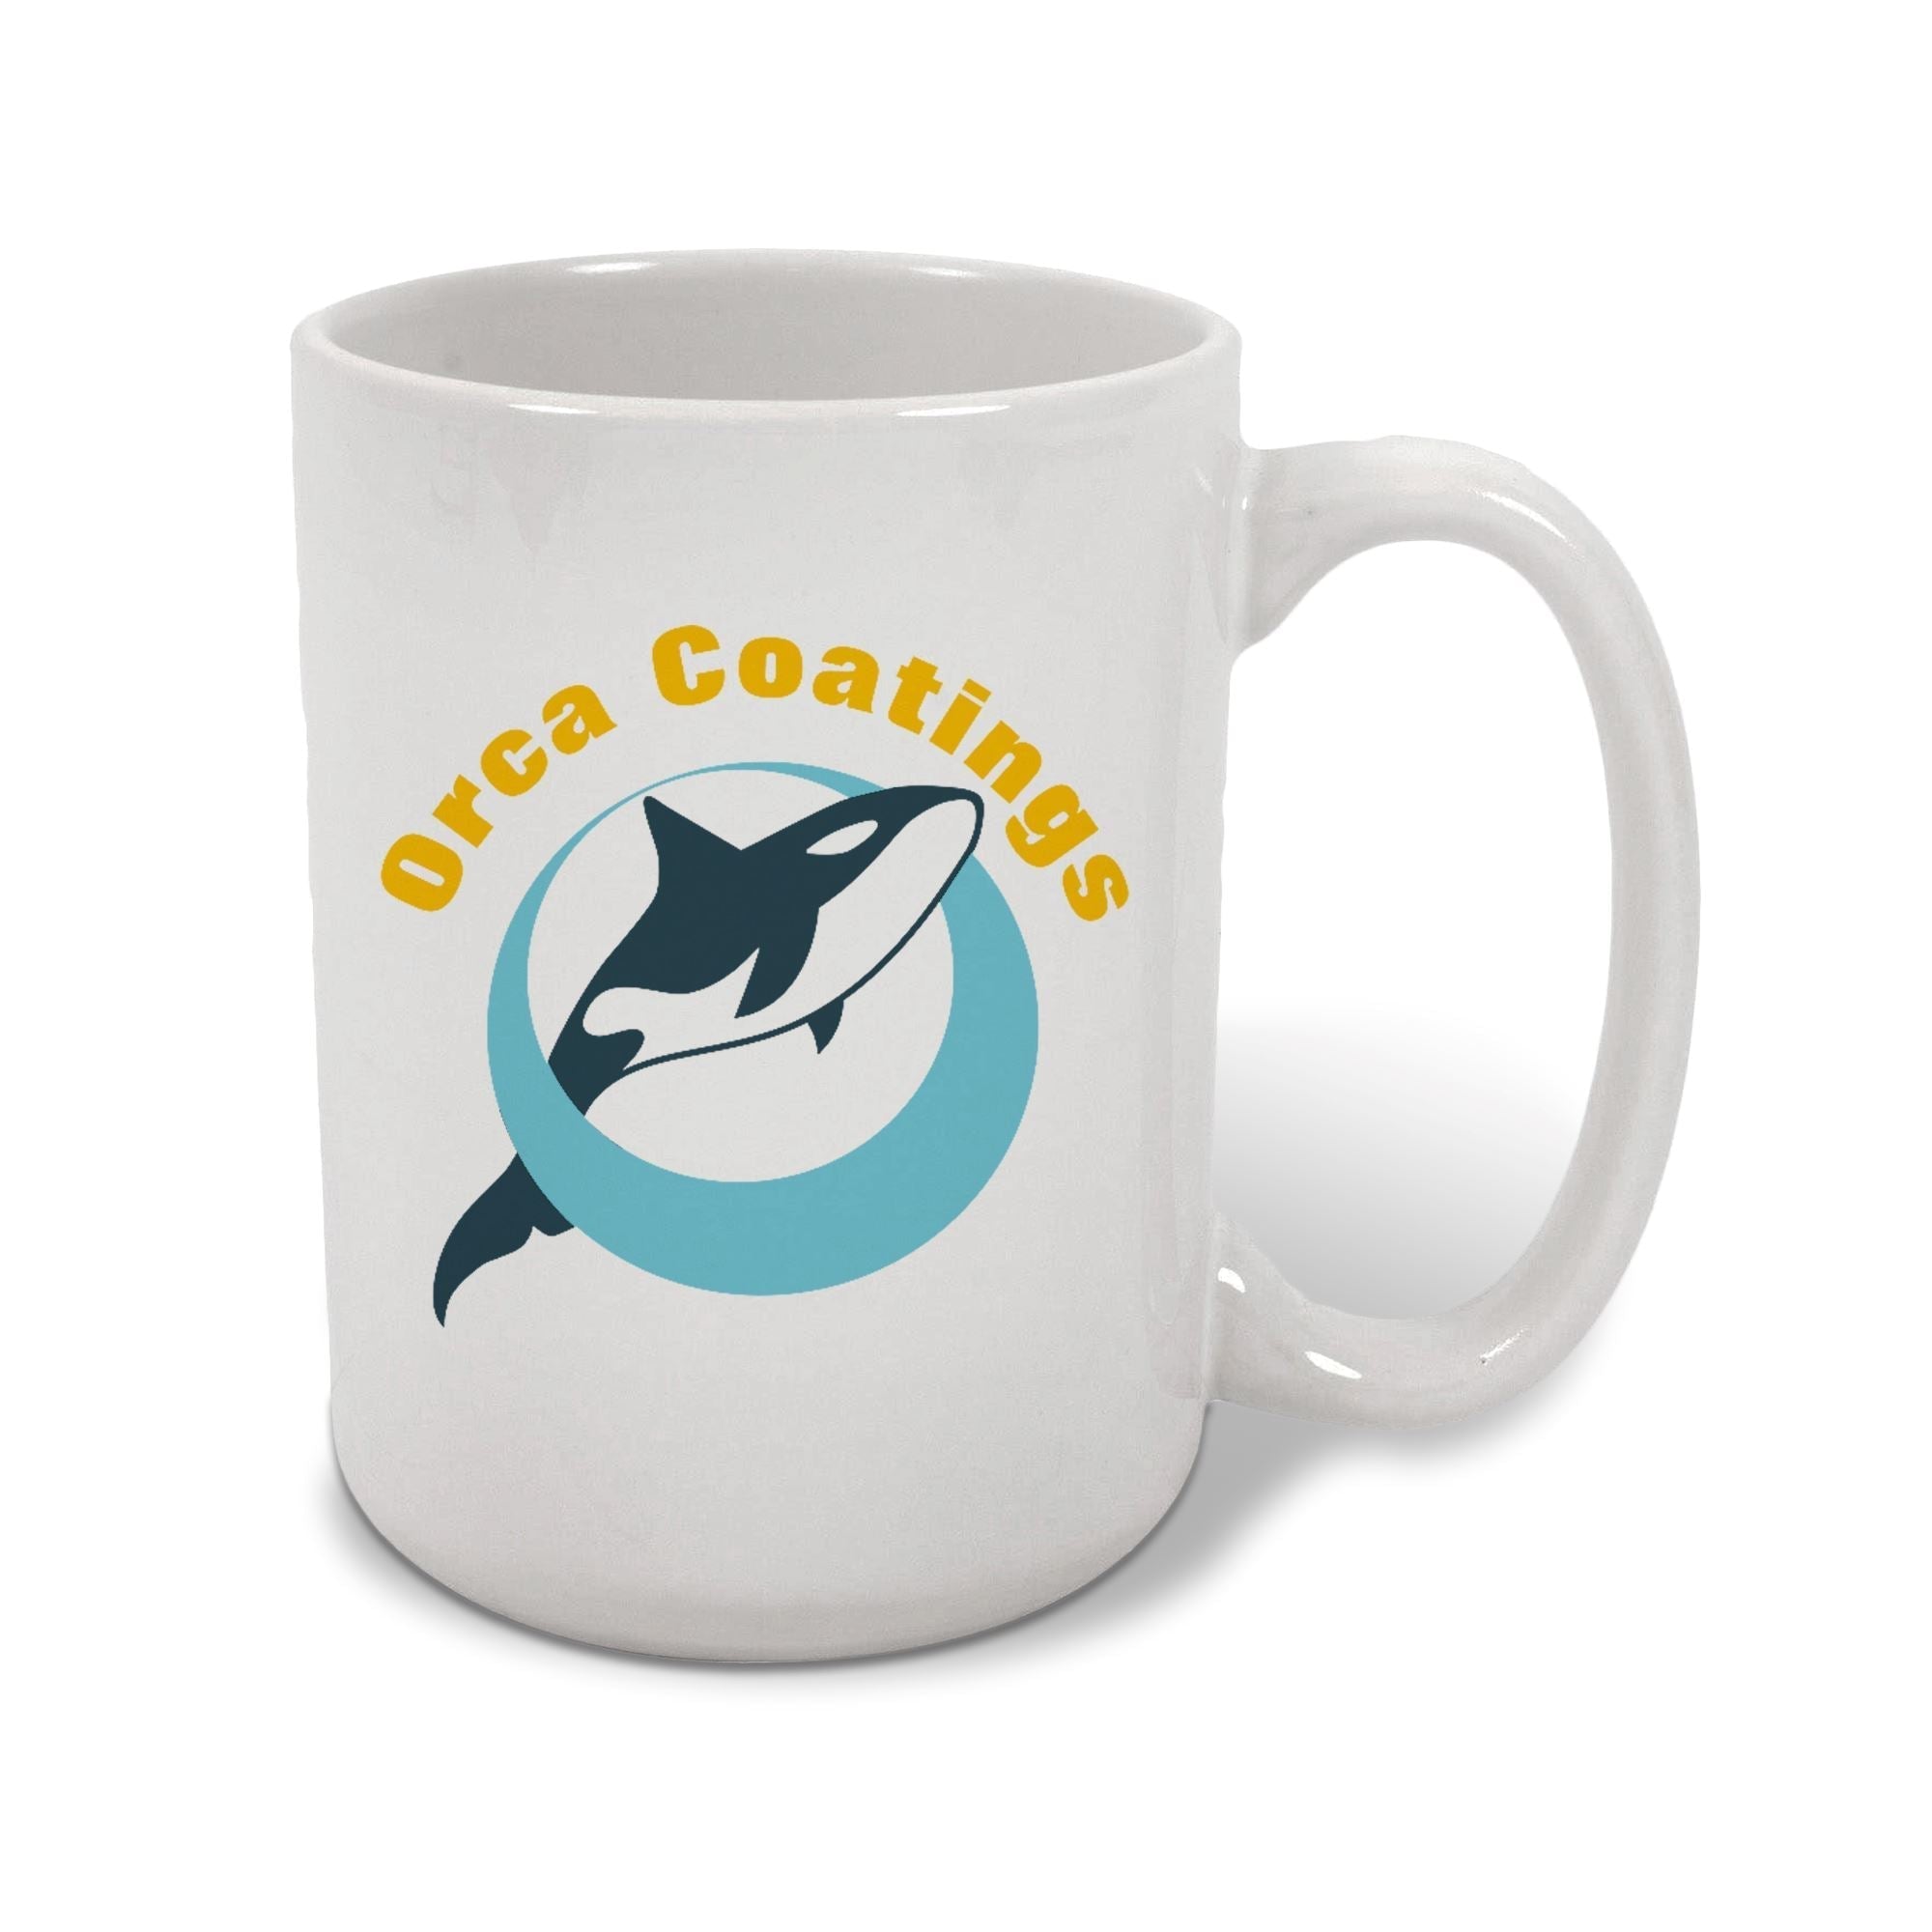 10 oz. Vacuum Insulated Stainless Steel Coffee Mug - Orcacoatings, the  Best-Selling Sublimation product brand